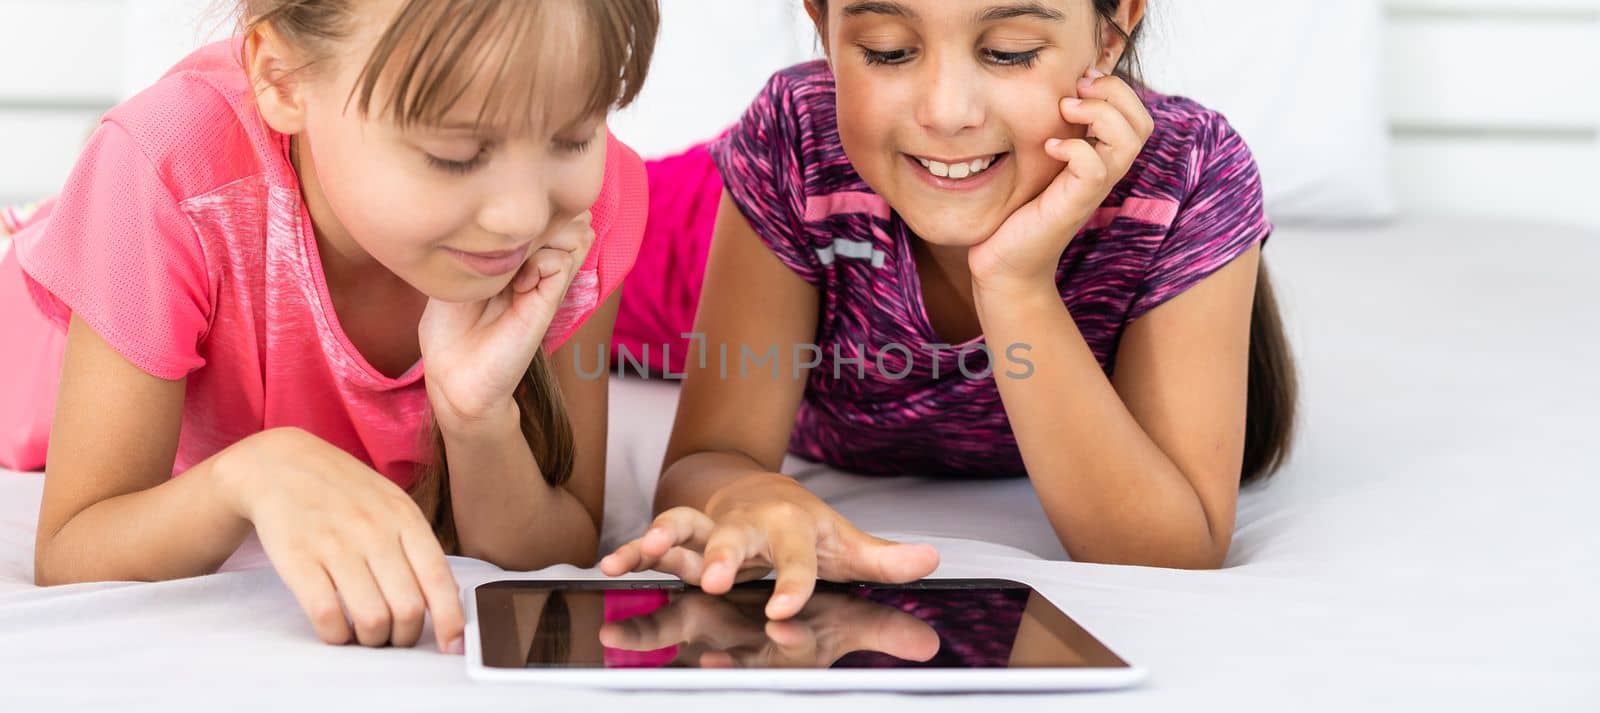 Little girls using tablet computer as art board - painting together.